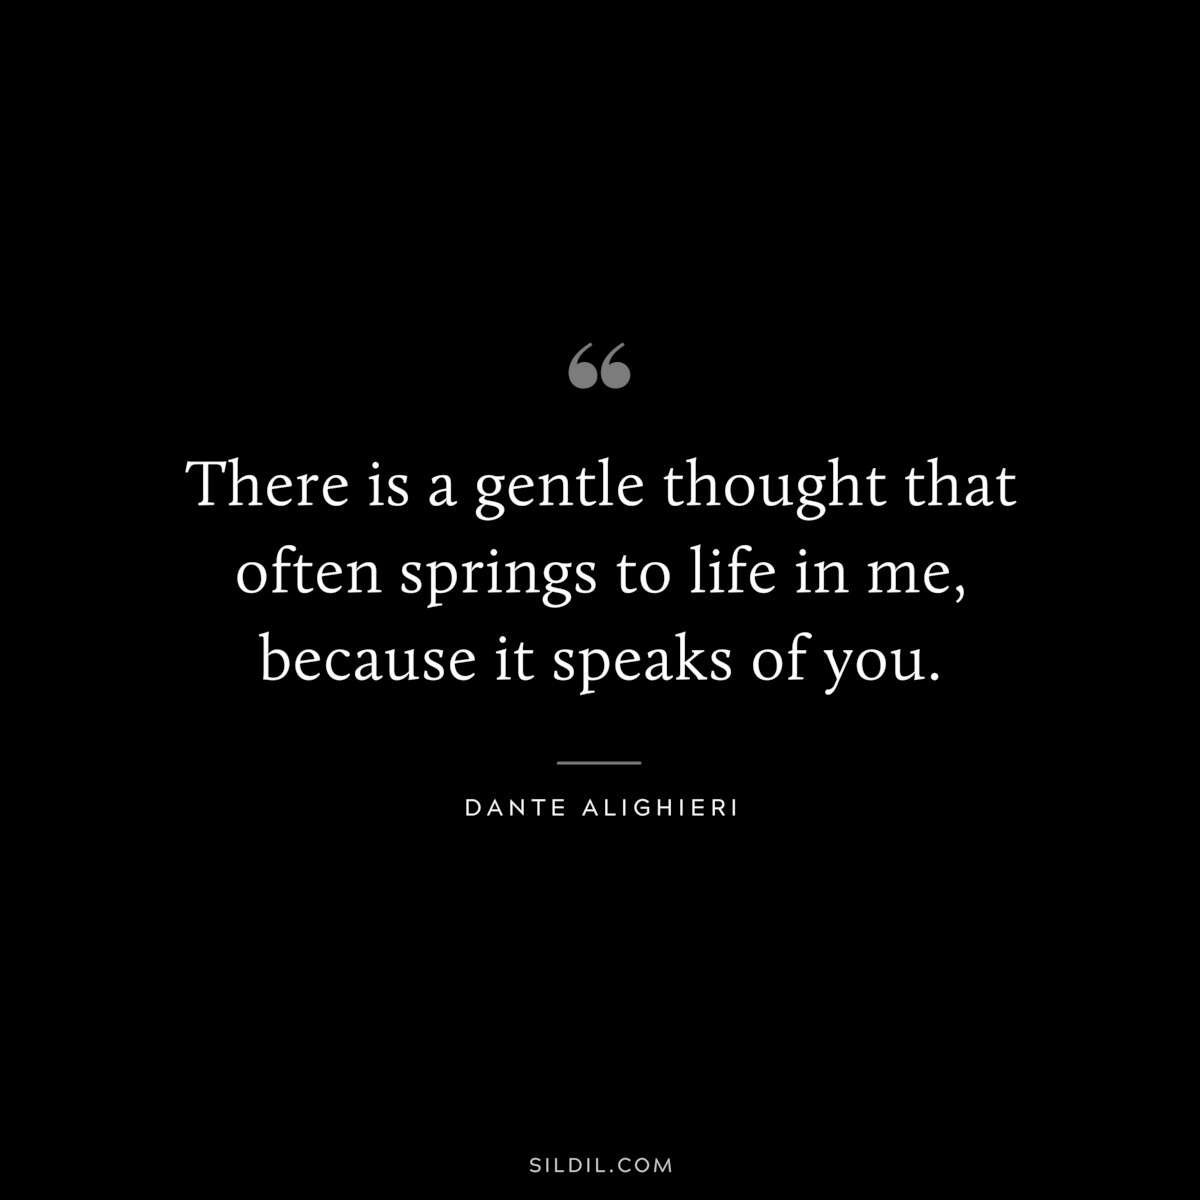 There is a gentle thought that often springs to life in me, because it speaks of you. ― Dante Alighieri